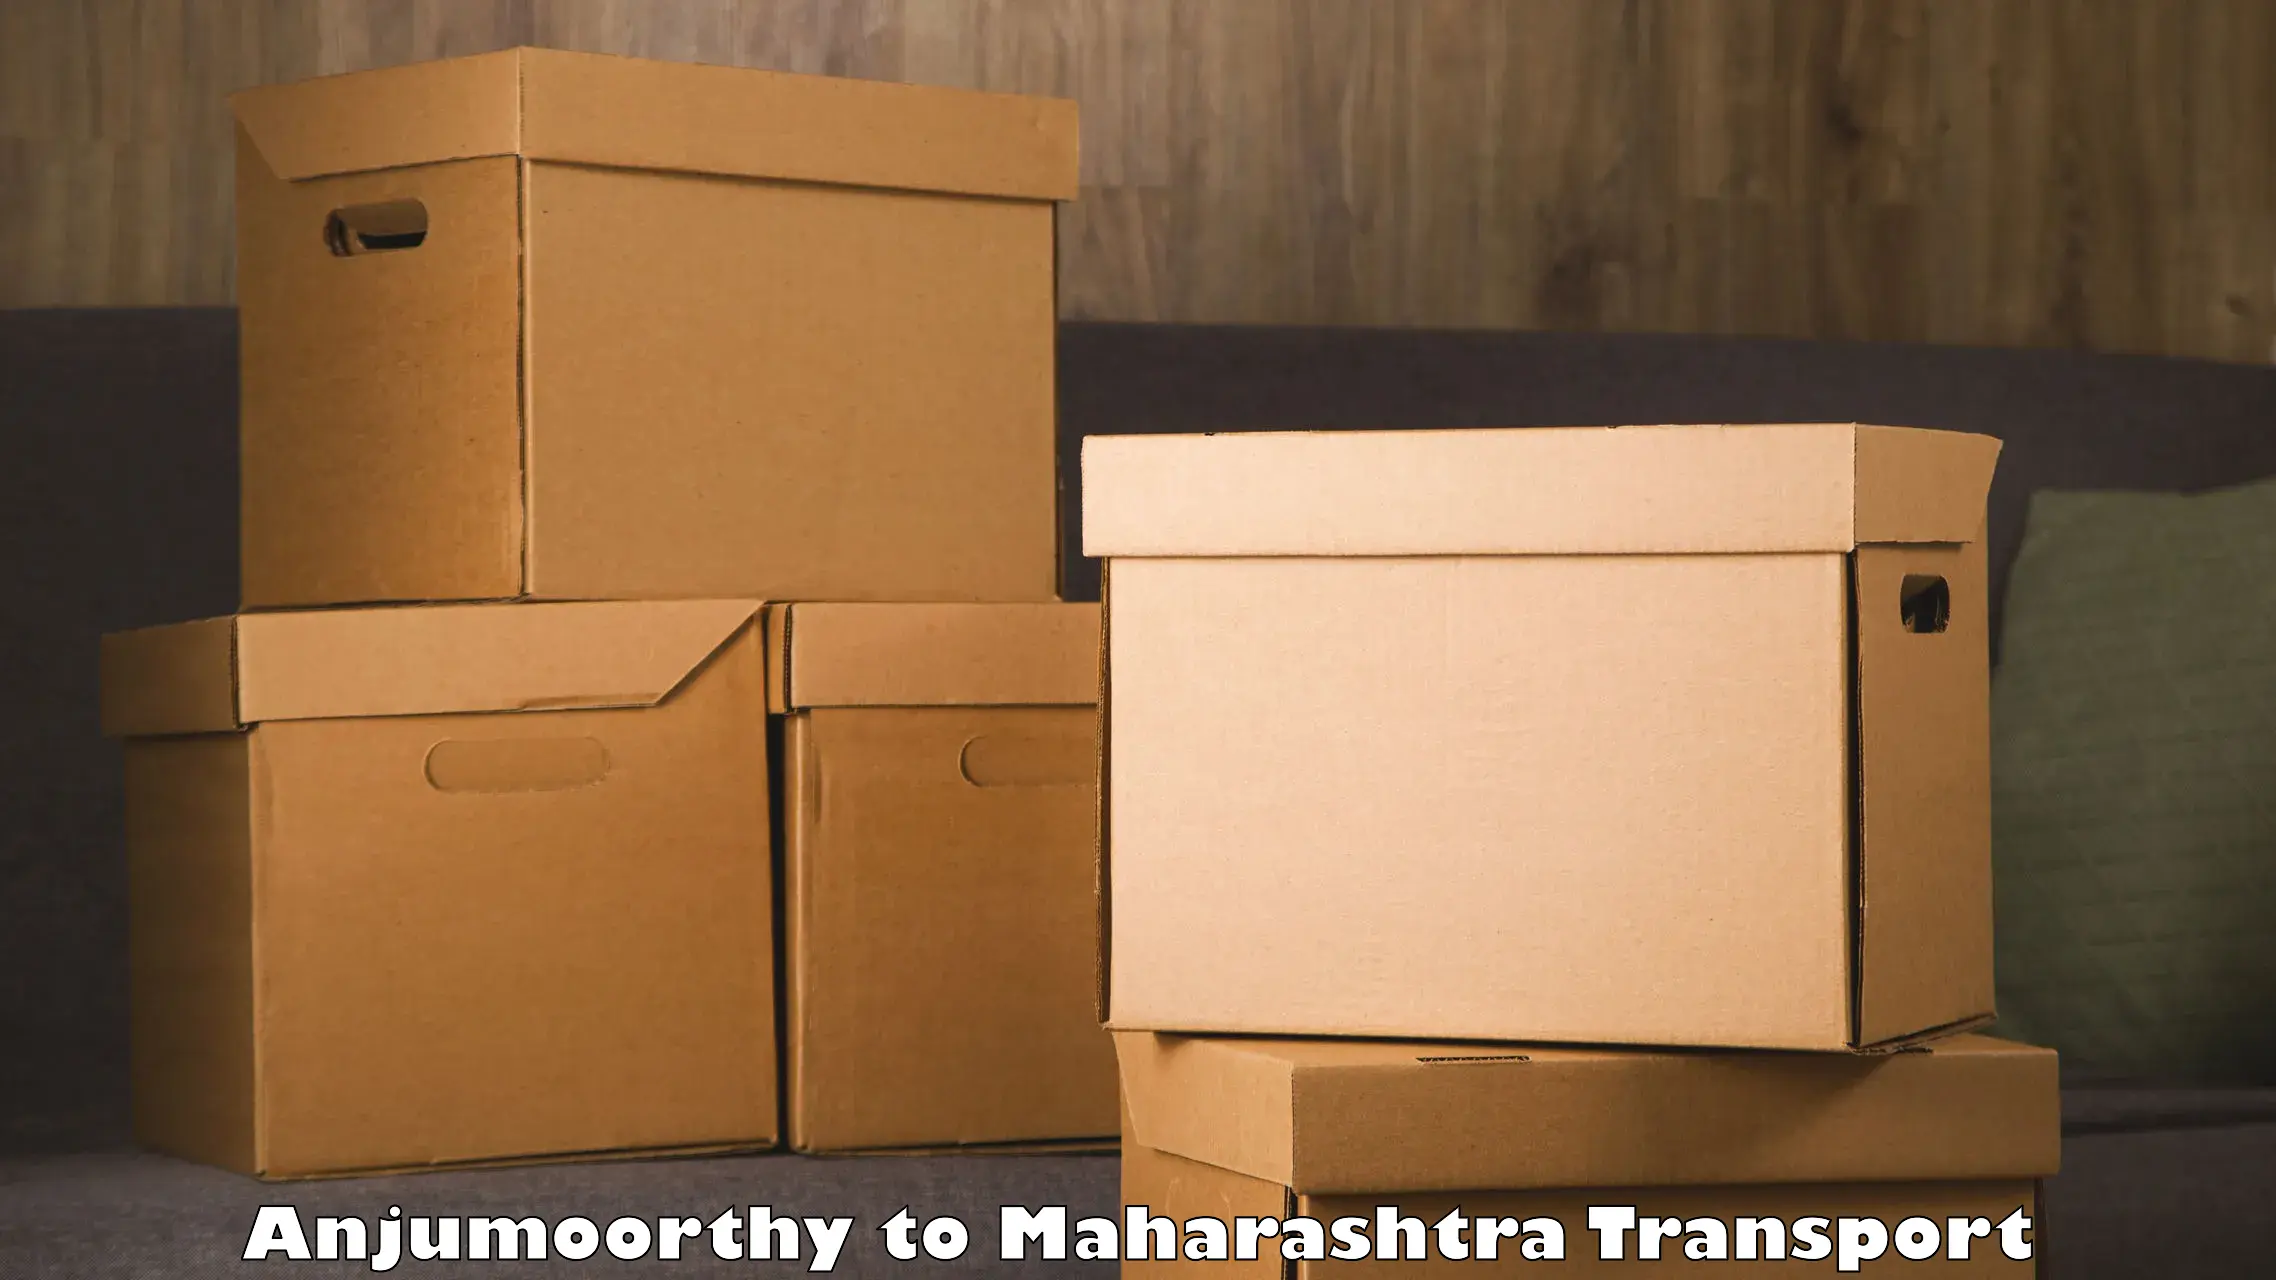 Air freight transport services Anjumoorthy to Thane